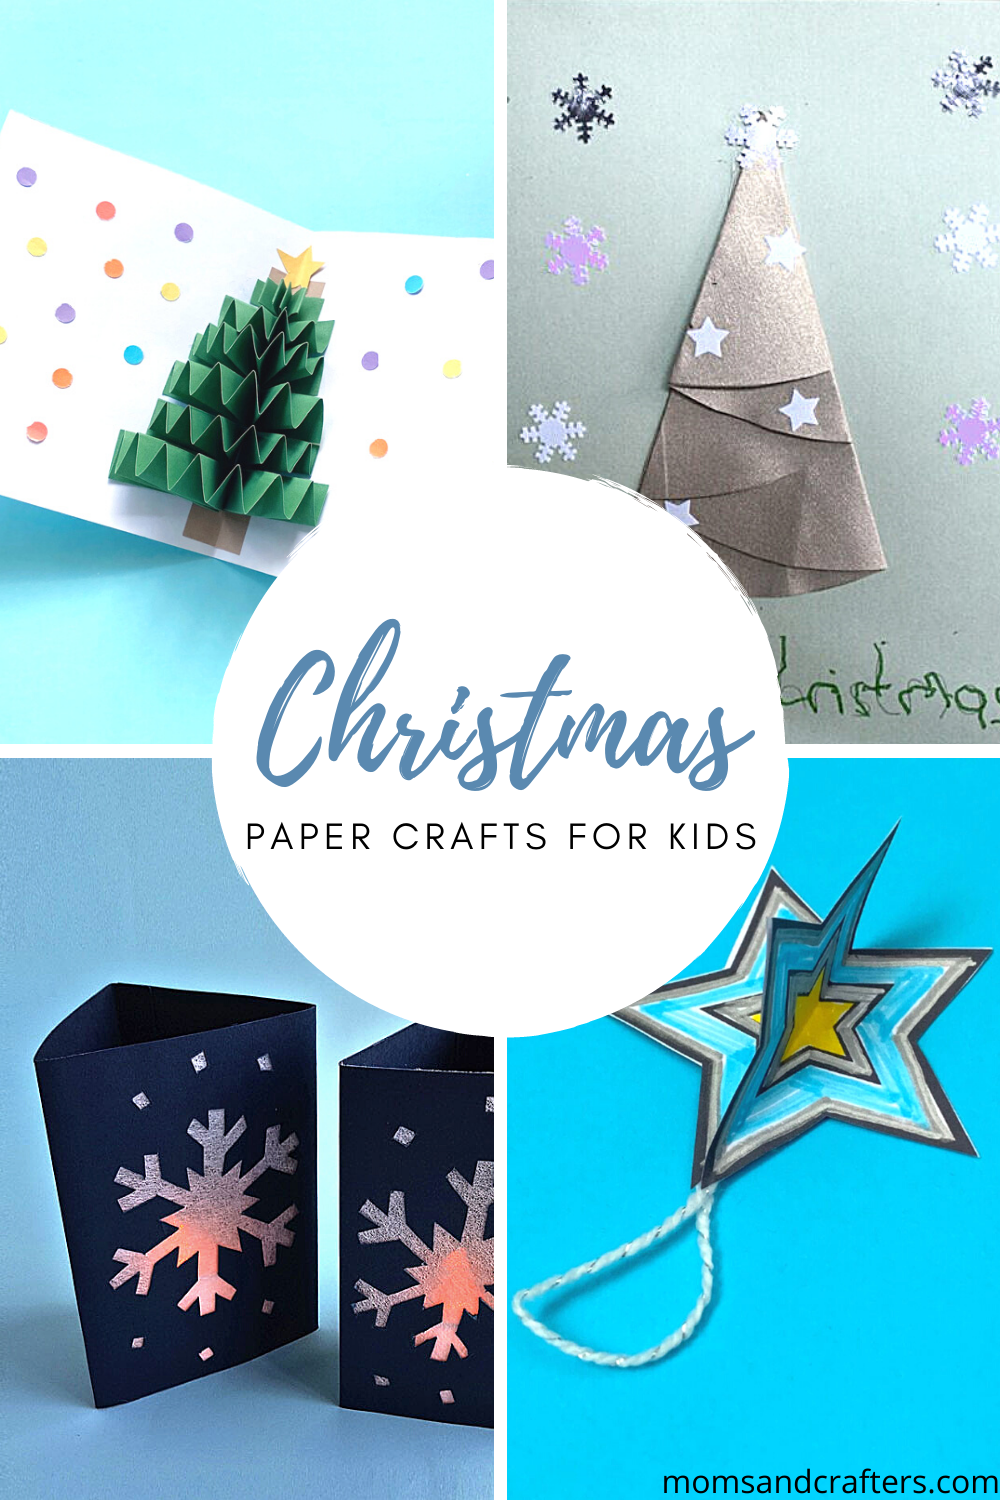 These Christmas paper crafts for kids are great for toddlers, preschool, and big kids! They include cardmaking ideas, decor, ornaments, and more!